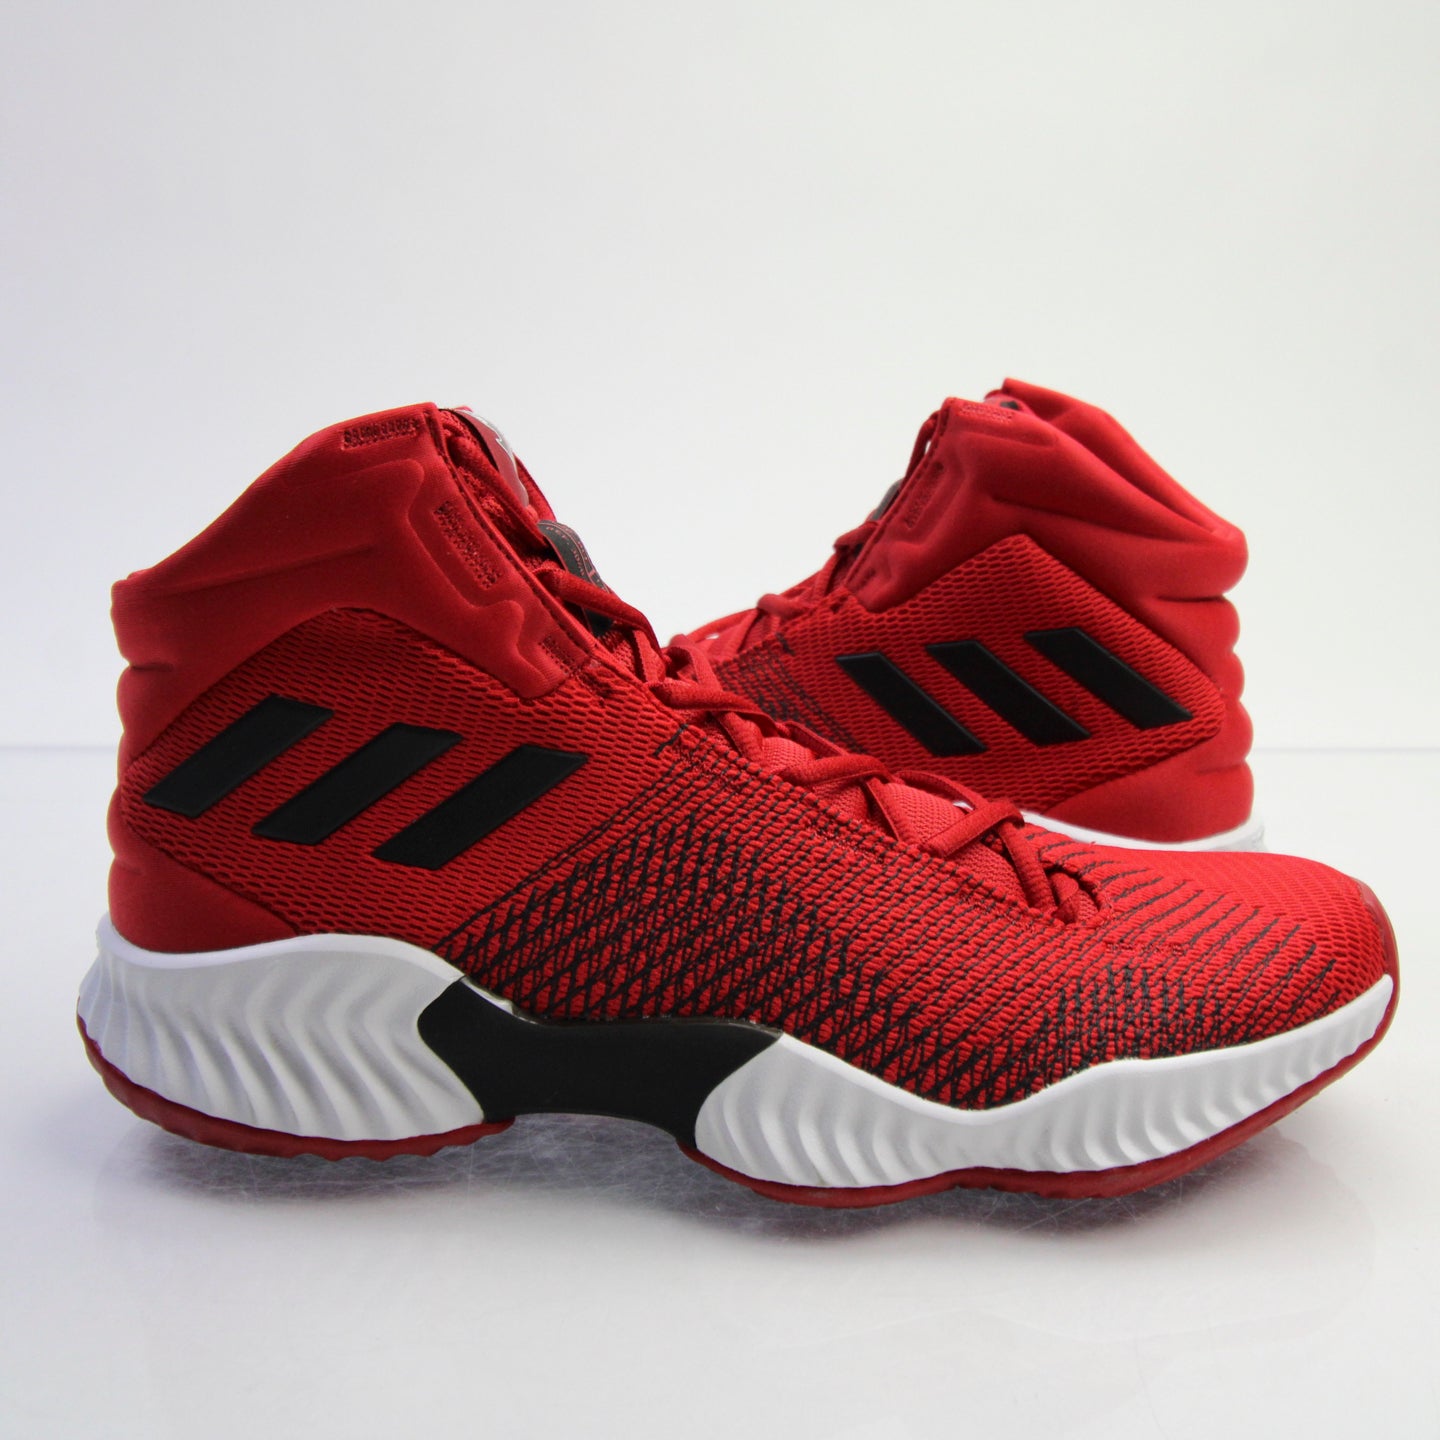 ADIDAS Pro Bounce 2019 Basketball Shoes For Men - Buy ADIDAS Pro Bounce 2019  Basketball Shoes For Men Online at Best Price - Shop Online for Footwears  in India | Flipkart.com